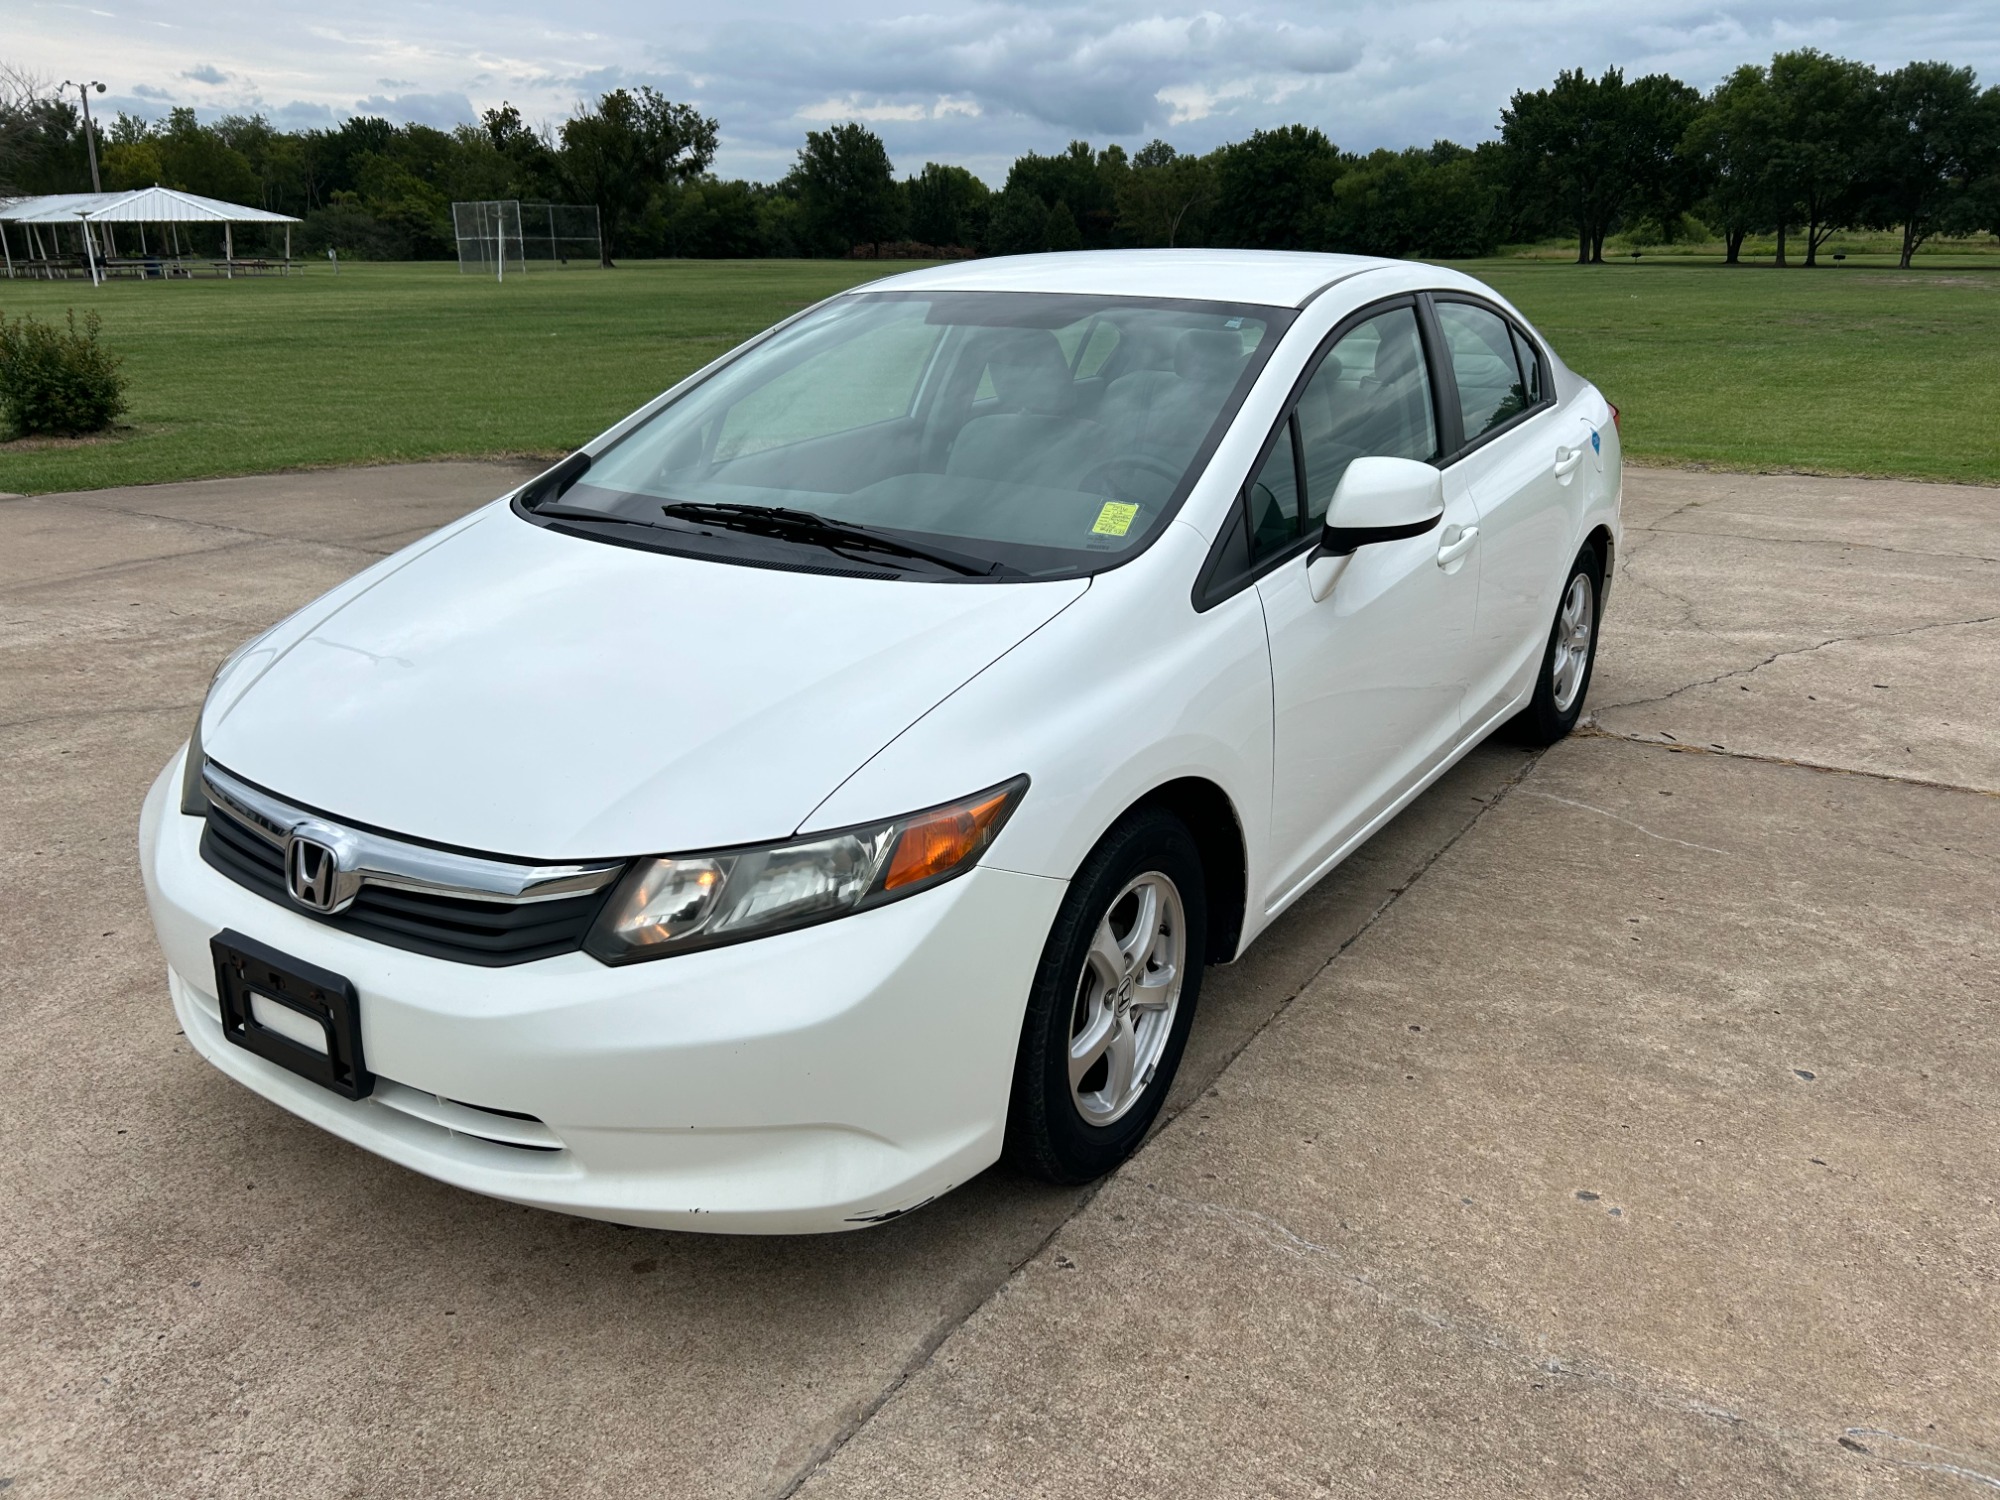 photo of 2012 Honda Civic CNG Sedan DEDICATED CNG (ONLY RUNS ON COMPRESSED NATURAL GAS) $1090 TAX CREDIT AVAILABLE